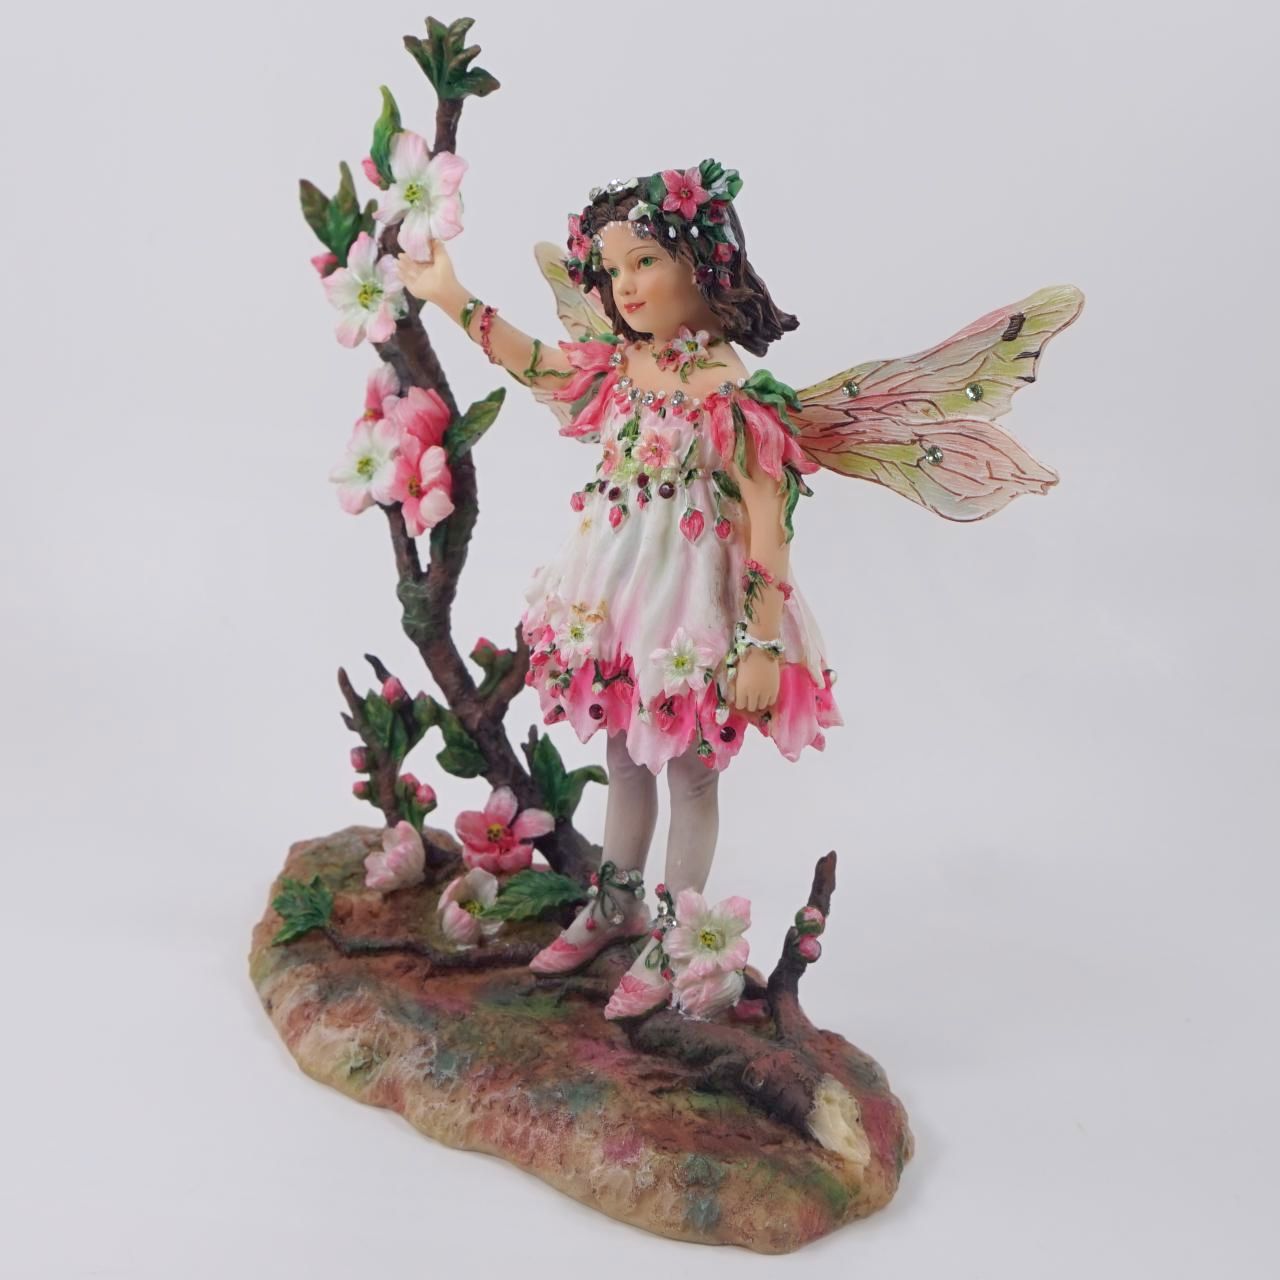 Crisalis Collection★ Cherry Blossom Faerie (1-355) Standard